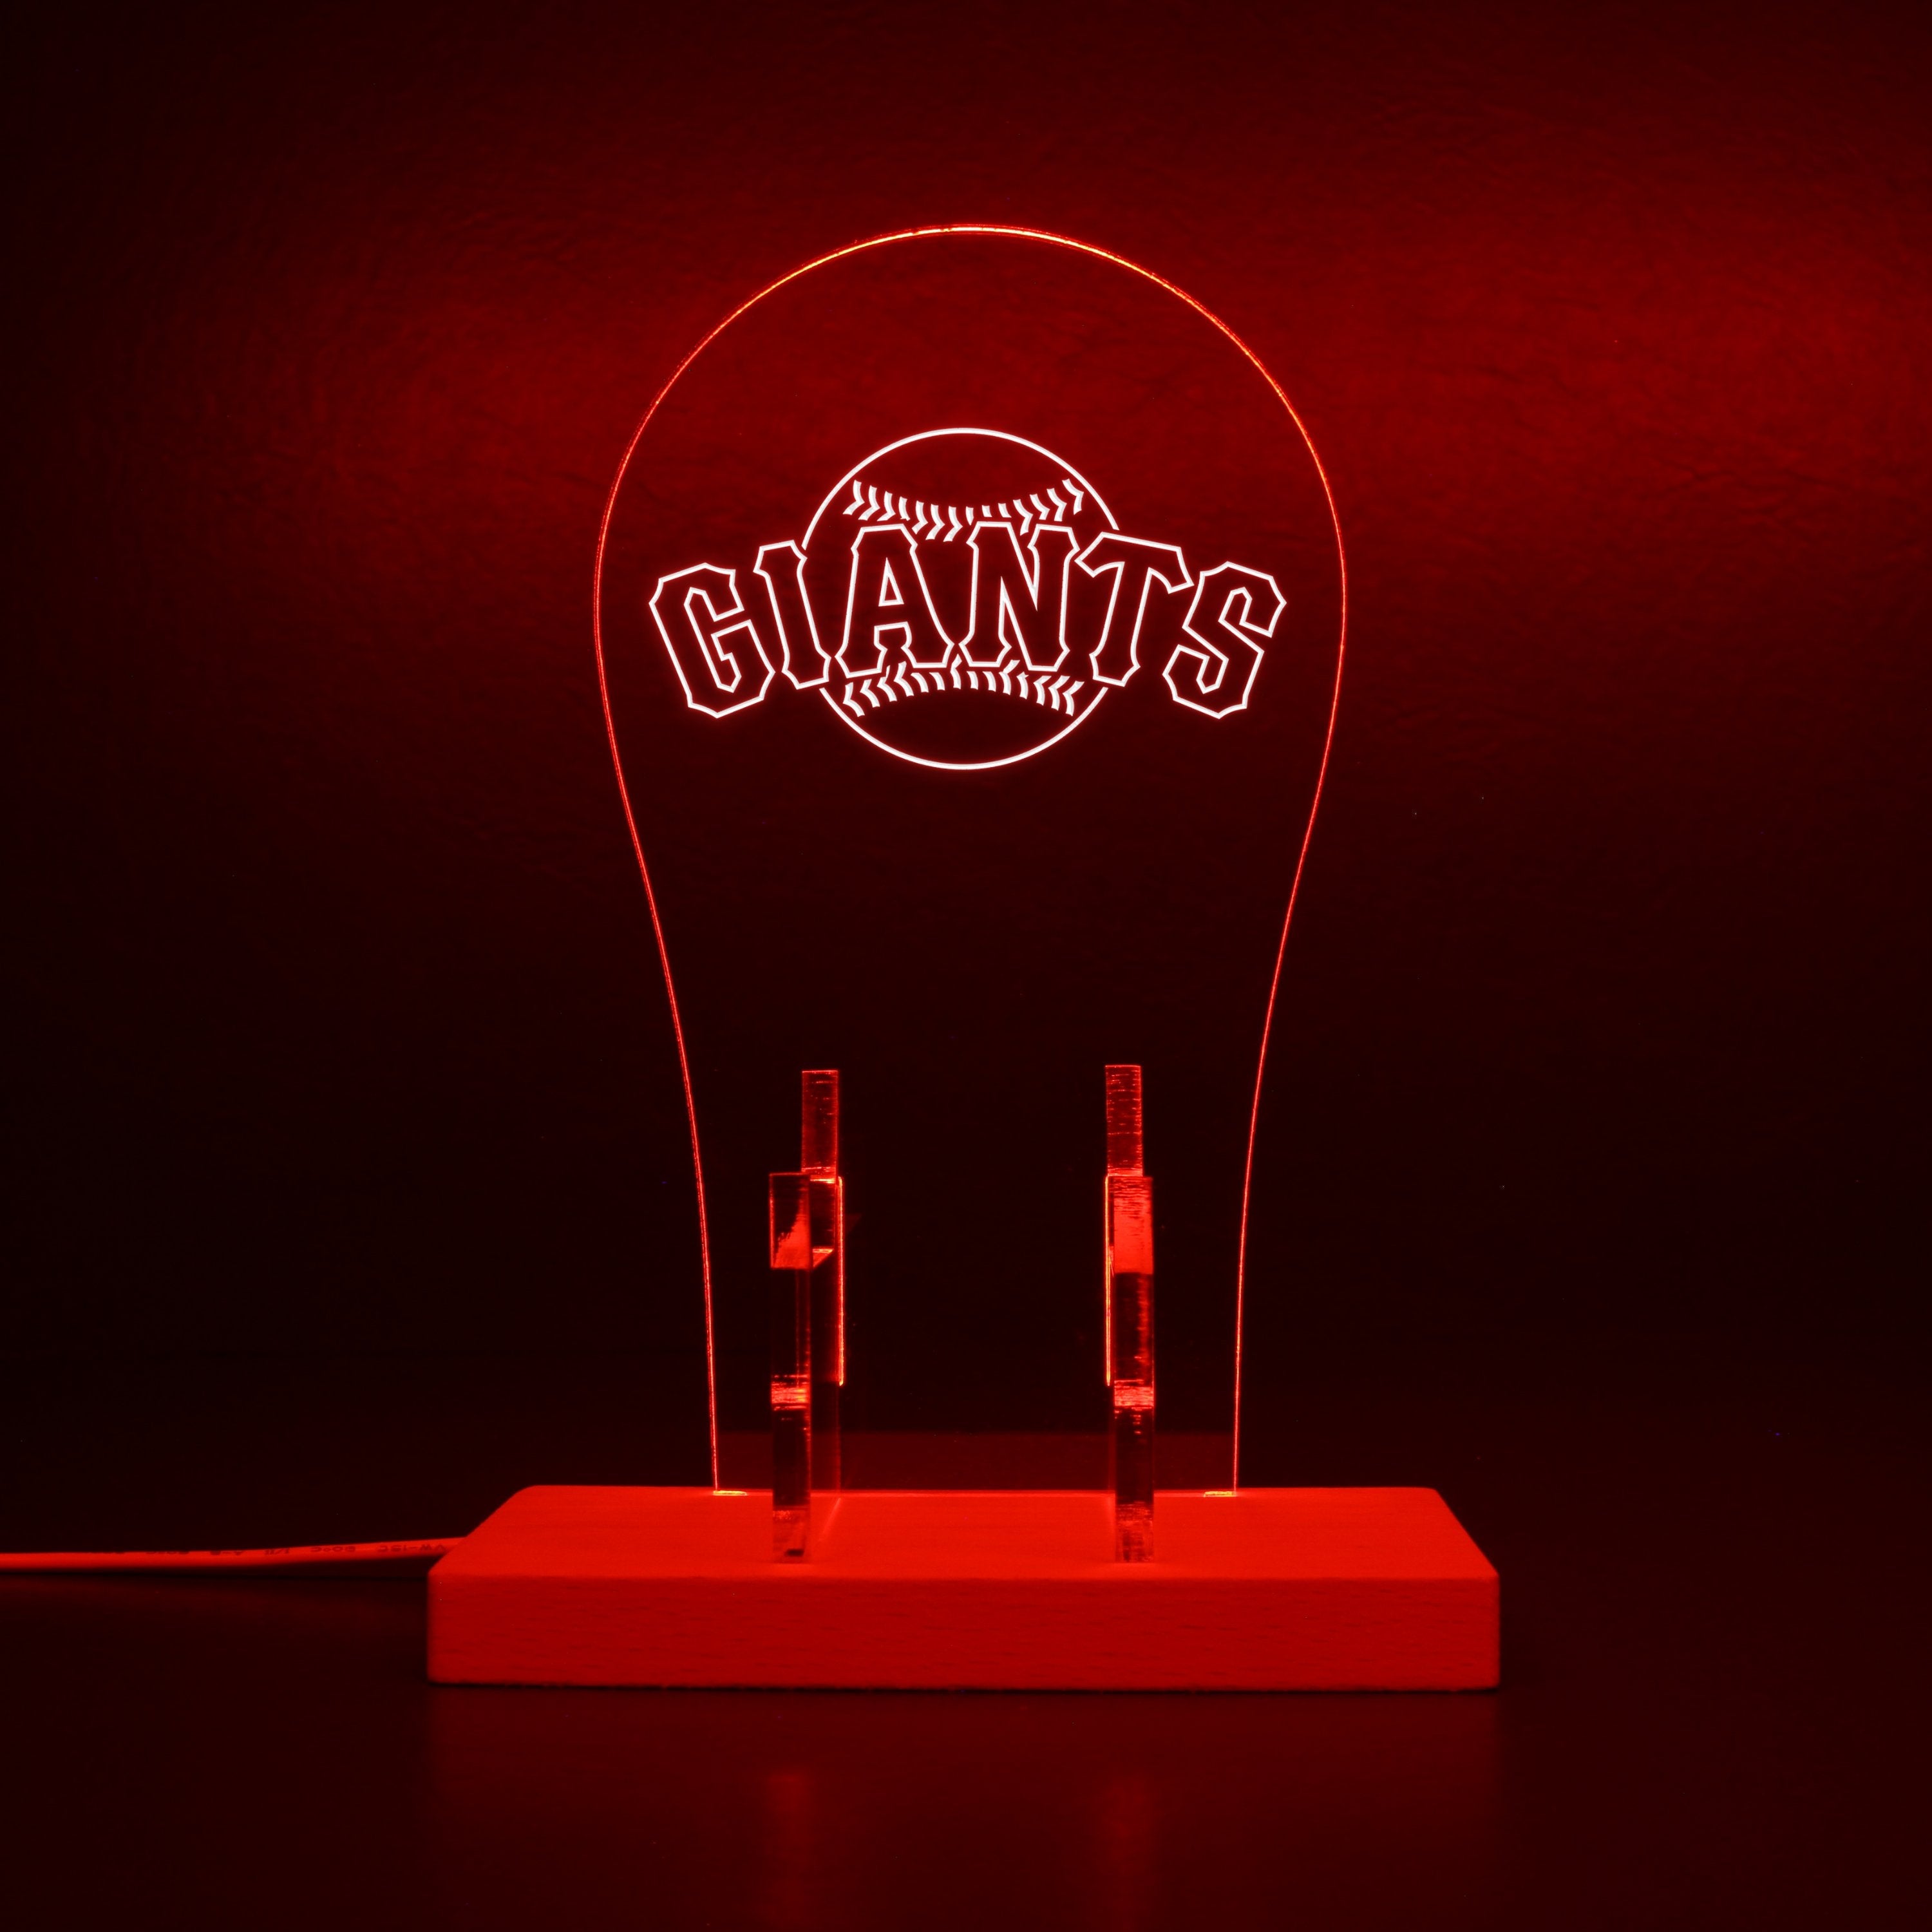 San Francisco Giants LED Gaming Headset Controller Stand